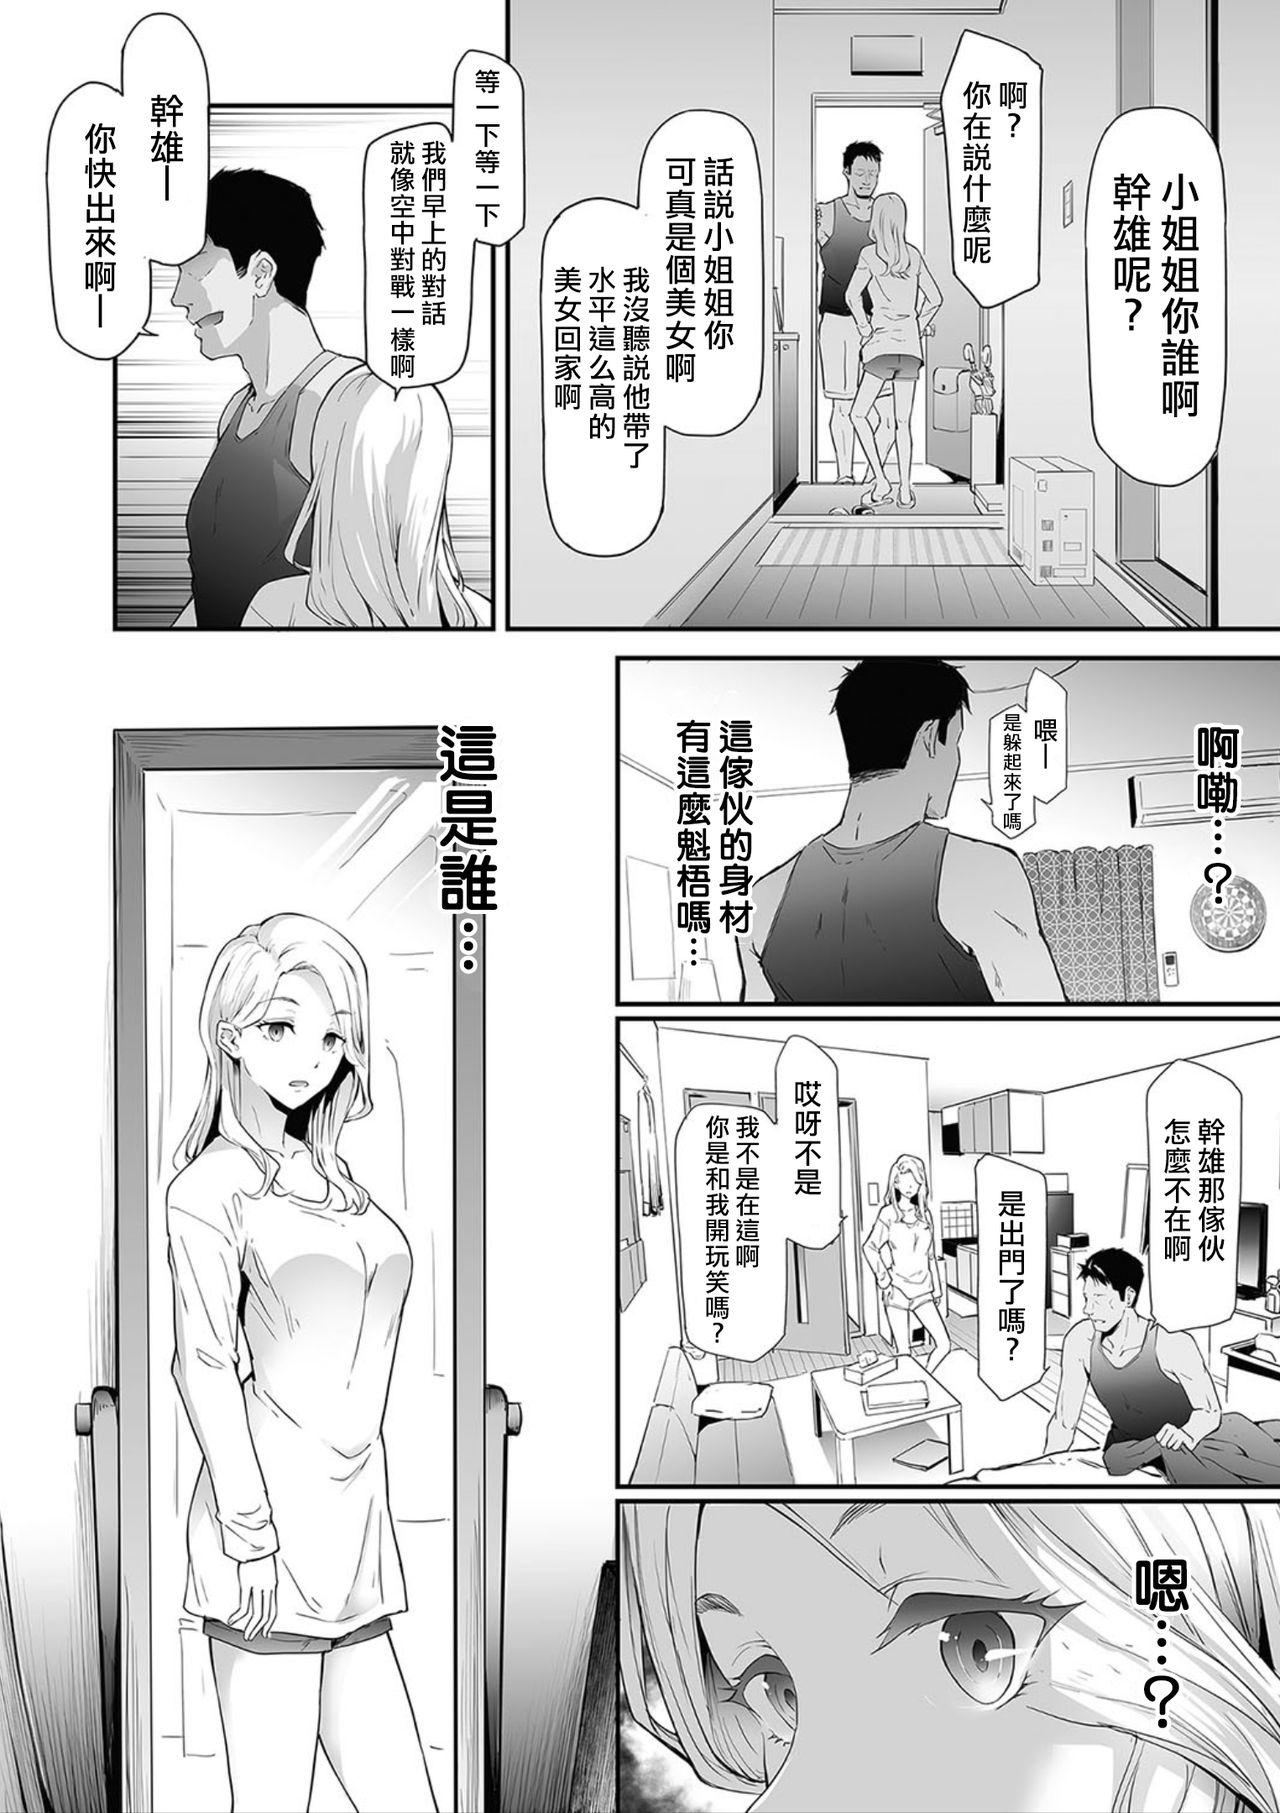 Chichona TS☆Revolution＜Ch.1＞ Audition - Page 8